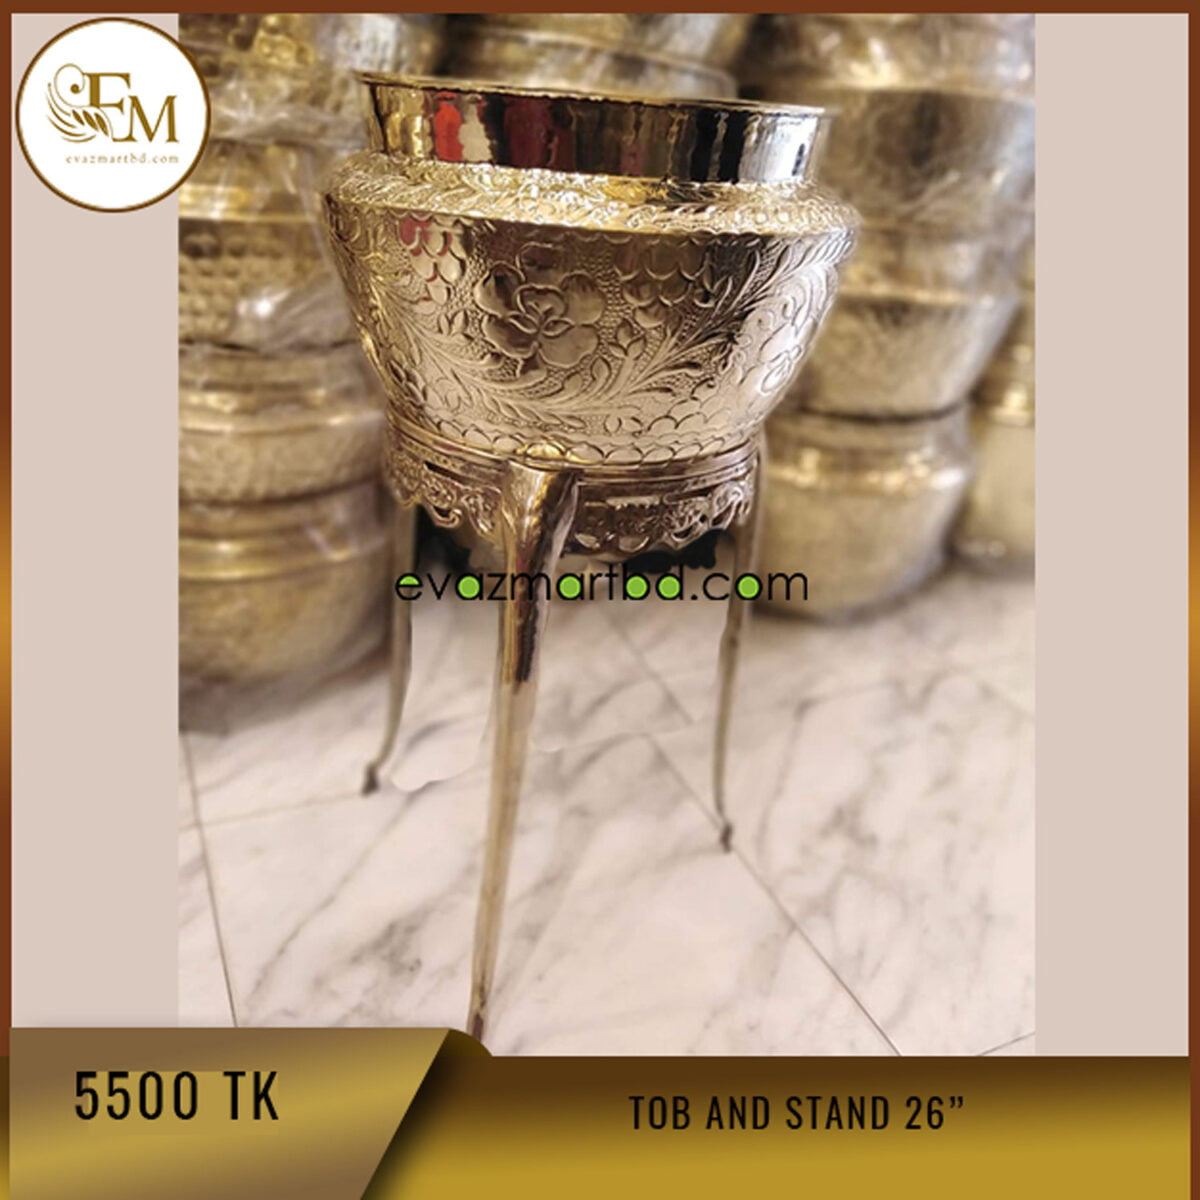 High quality brass metal designed tob and stand